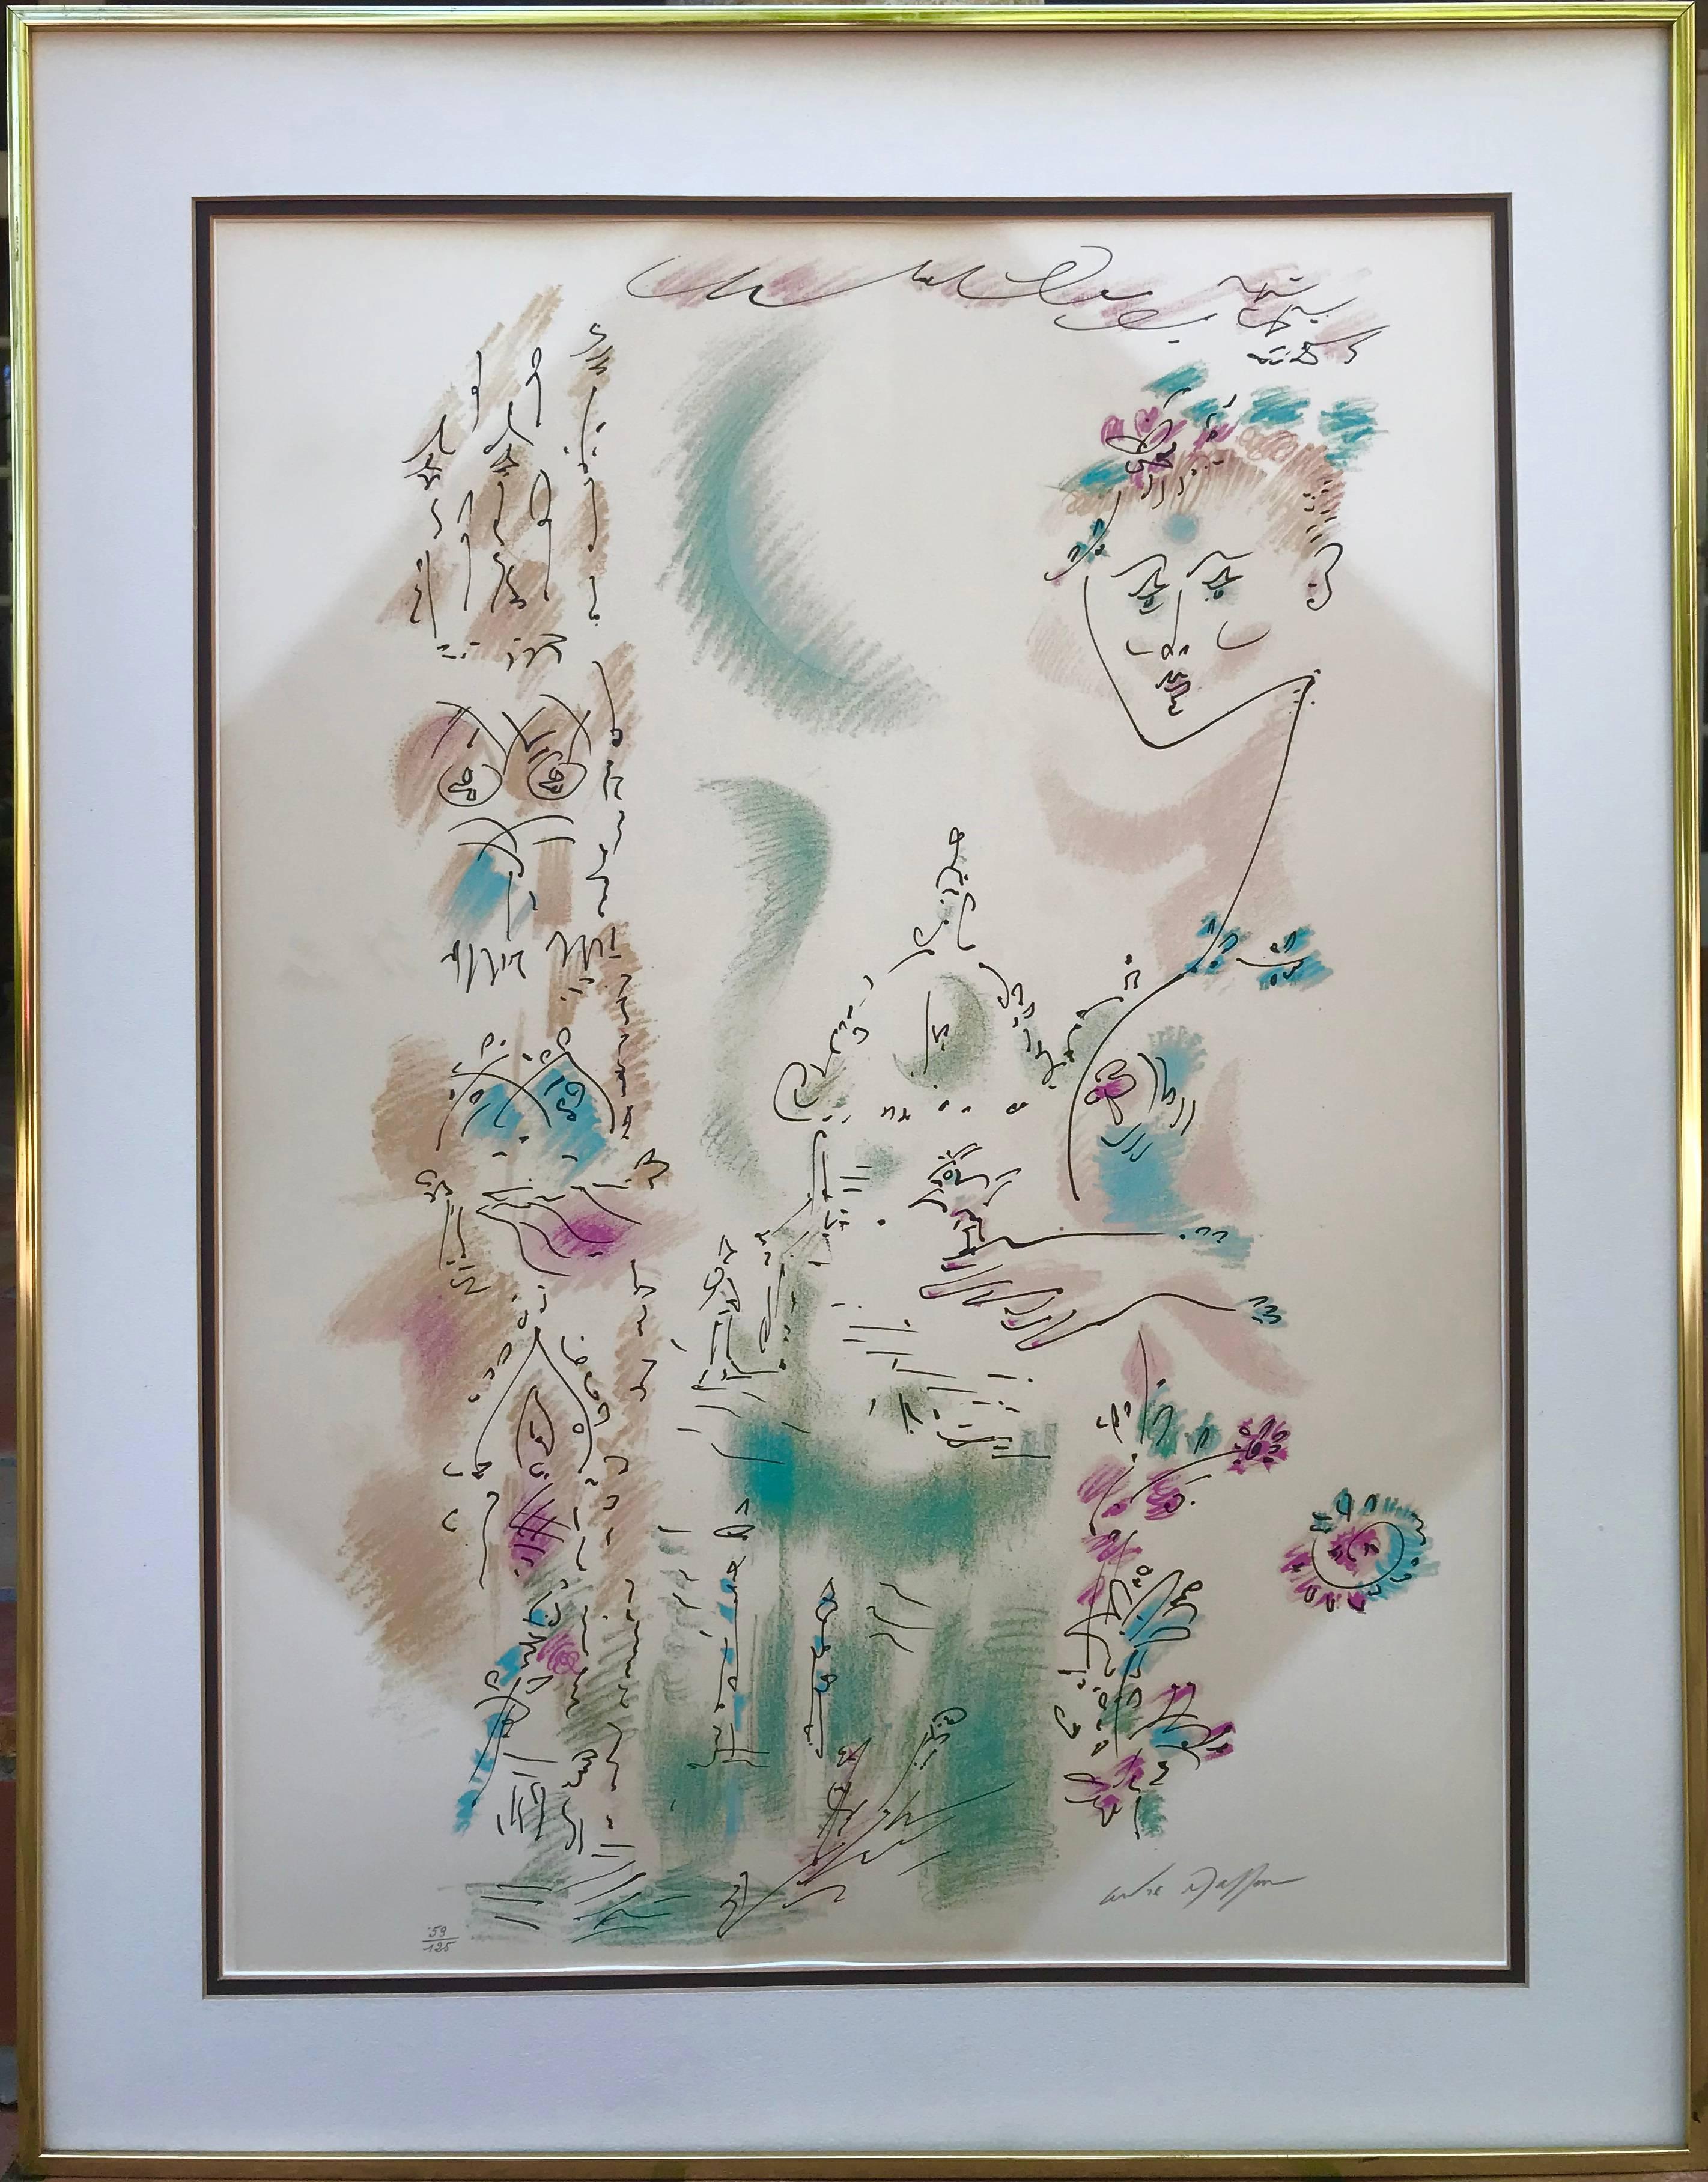 Venice en Fleurs.  Original colored lithograph on arches paper by the French artist, Andre Masson. Done in 1975. Edition: 59/125. Pencil signed lower right. Edition signed lower left.  From the Je Reve portfolio.  Overall framed with original thin